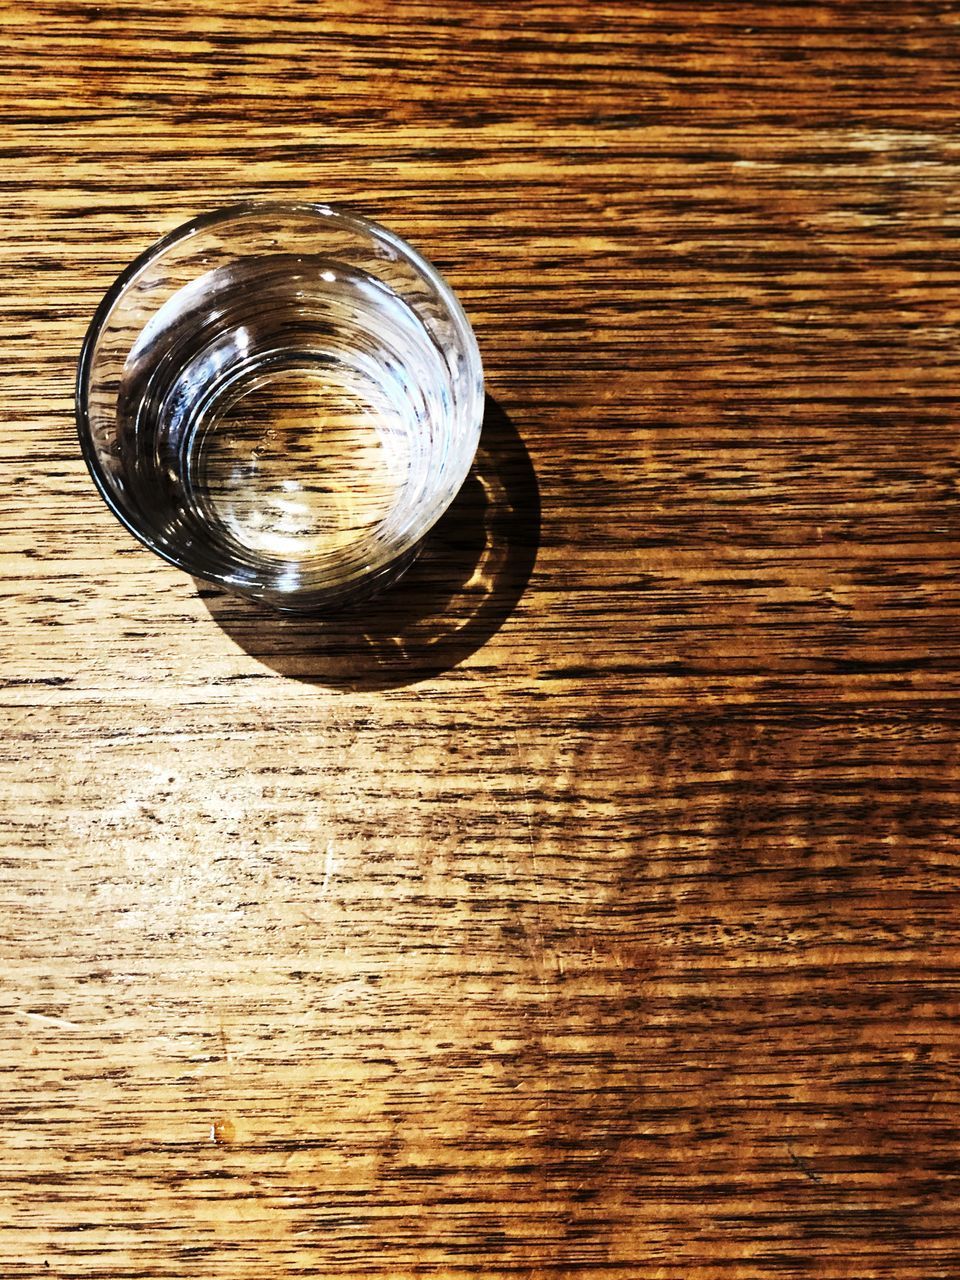 HIGH ANGLE VIEW OF BEER GLASS ON TABLE